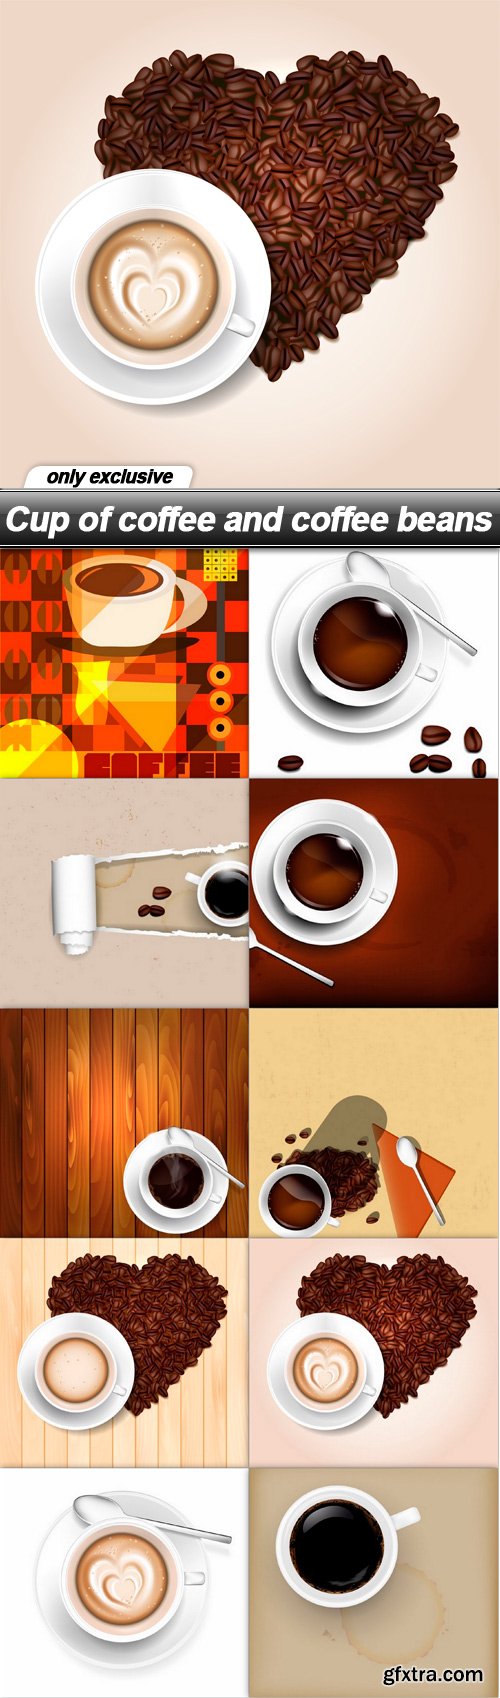 Cup of coffee and coffee beans - 10 EPS